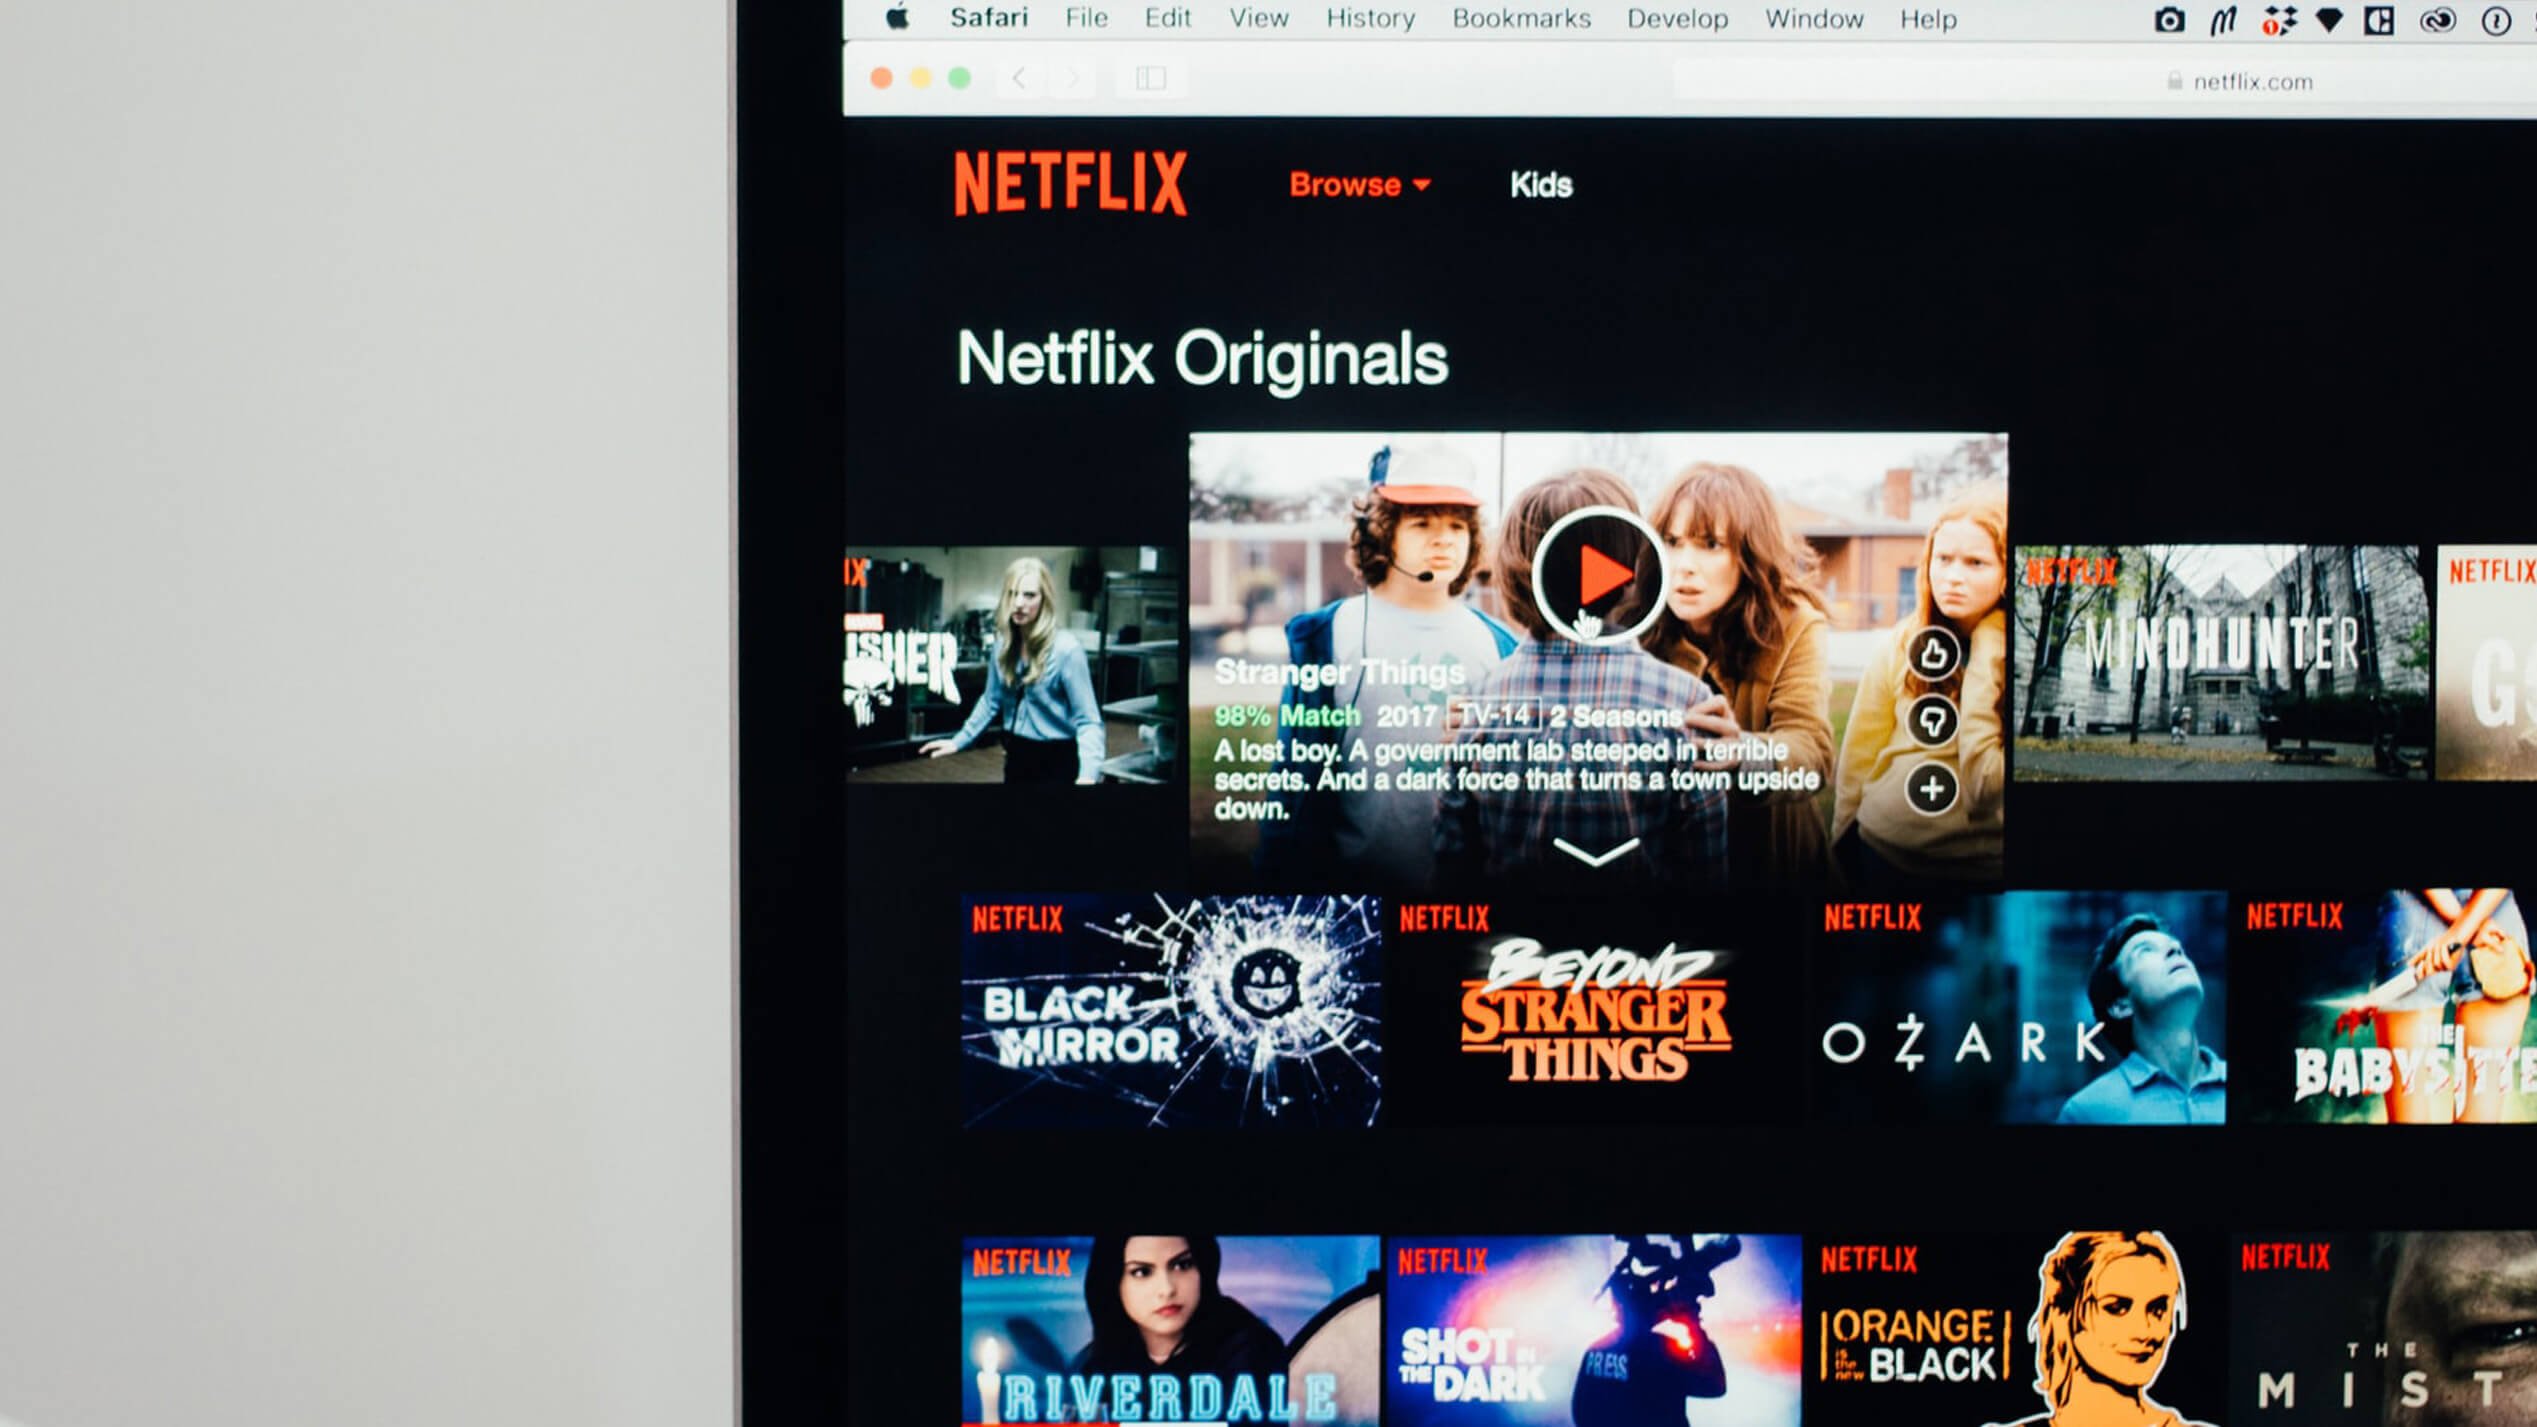 A laptop shows the Netflix browser displaying a grid of Netflix origin programs including Black Mirror and Stranger Things.